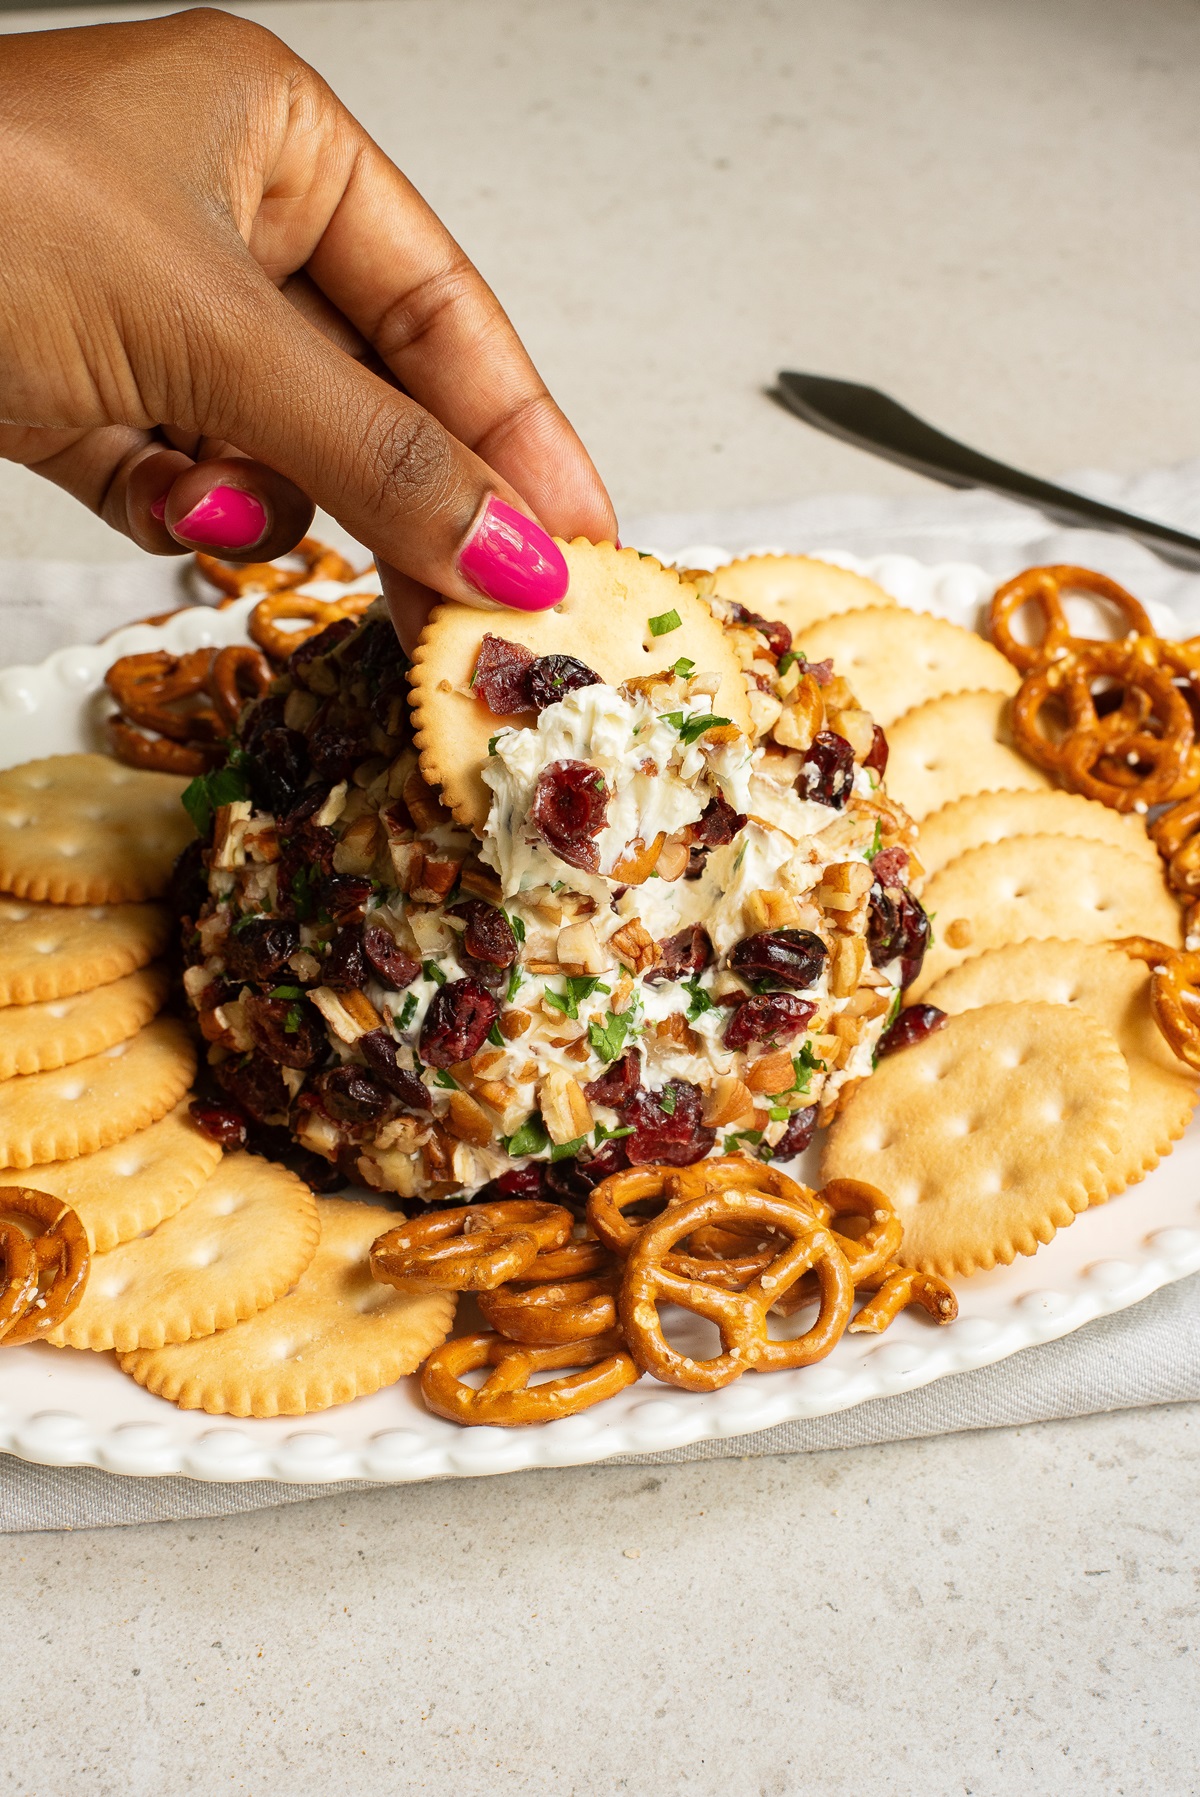 A cracker being used to take some of the cranberry pecan cheeseball.